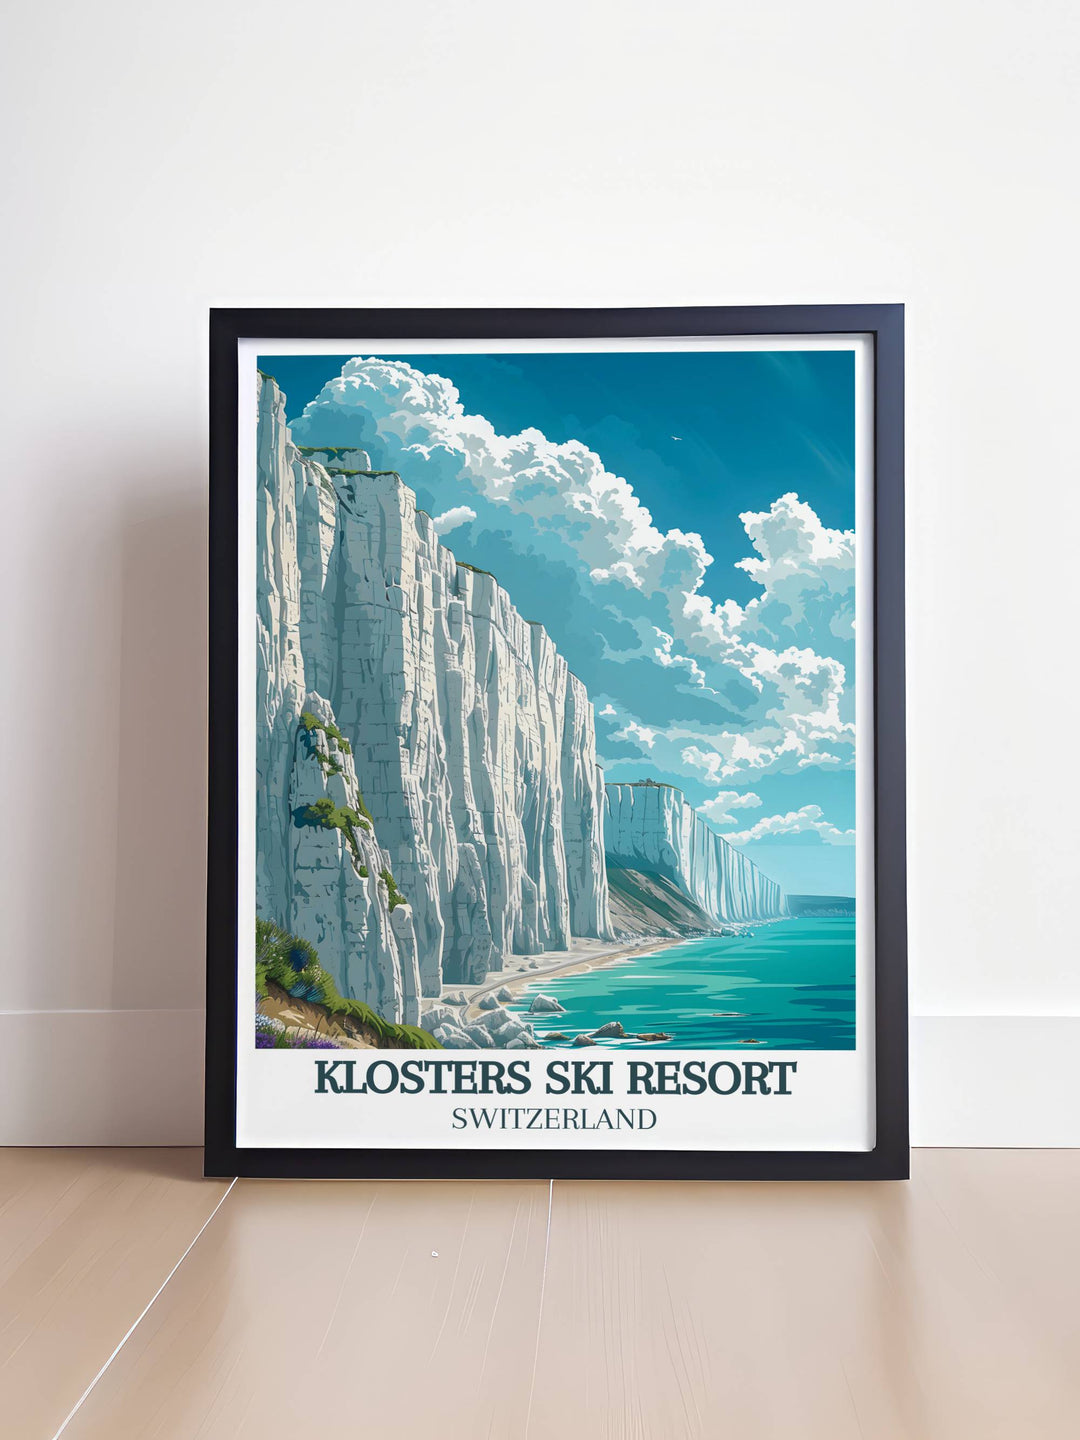 Add a touch of English charm to your home with our White Cliffs of Dover vintage print. This stunning wall art features the breathtaking views of the White Cliffs of Dover making it a perfect addition to any living space or office. Ideal for lovers of travel and picturesque landscapes